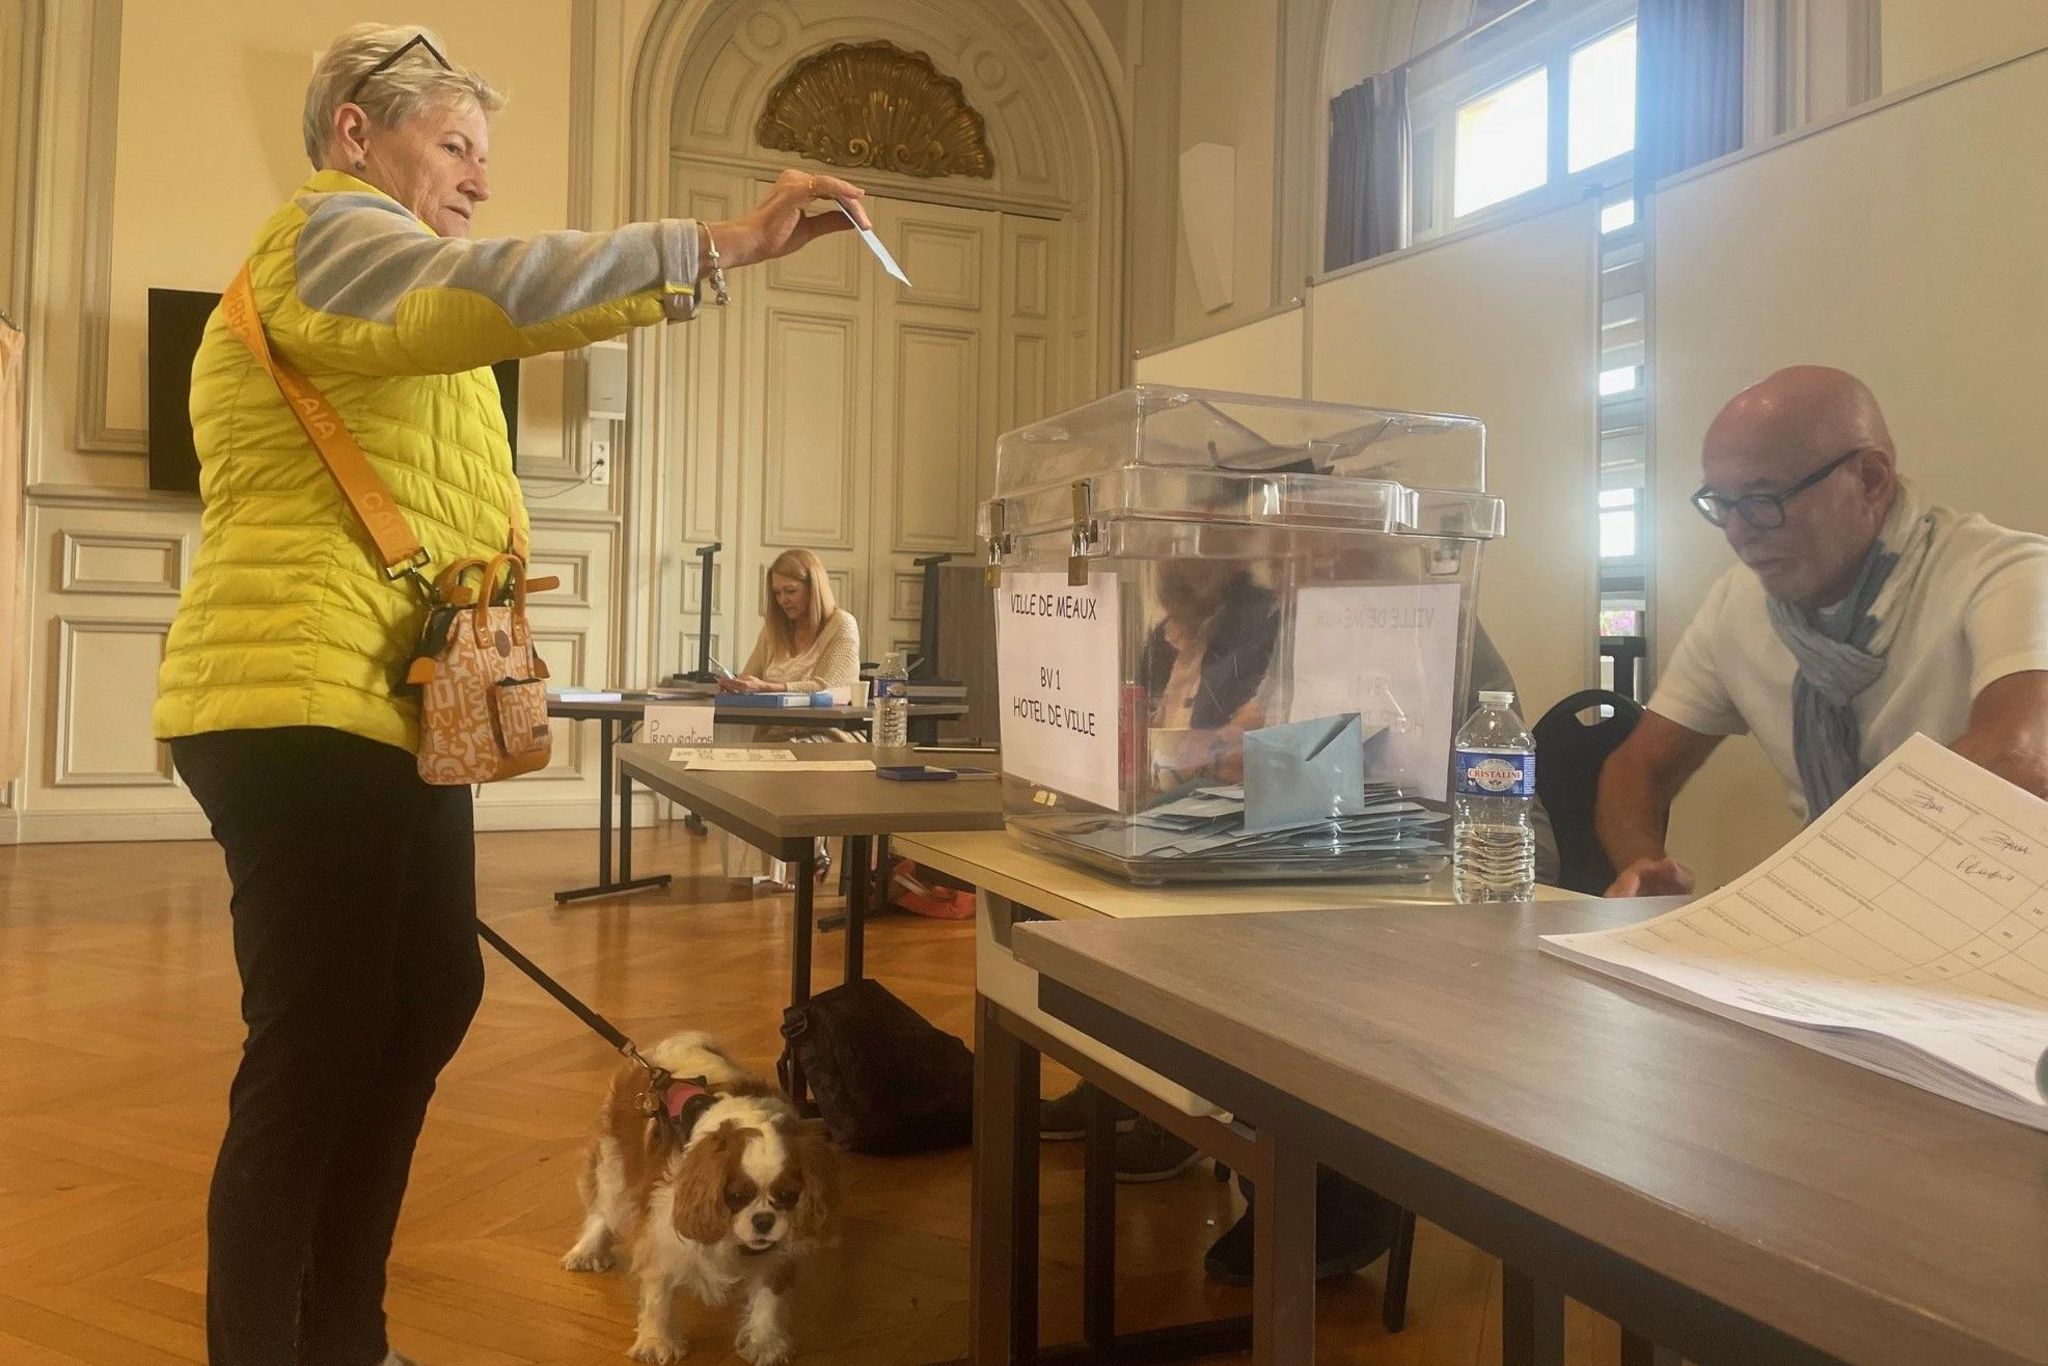 Claudine votes in Meaux with dog Zapie